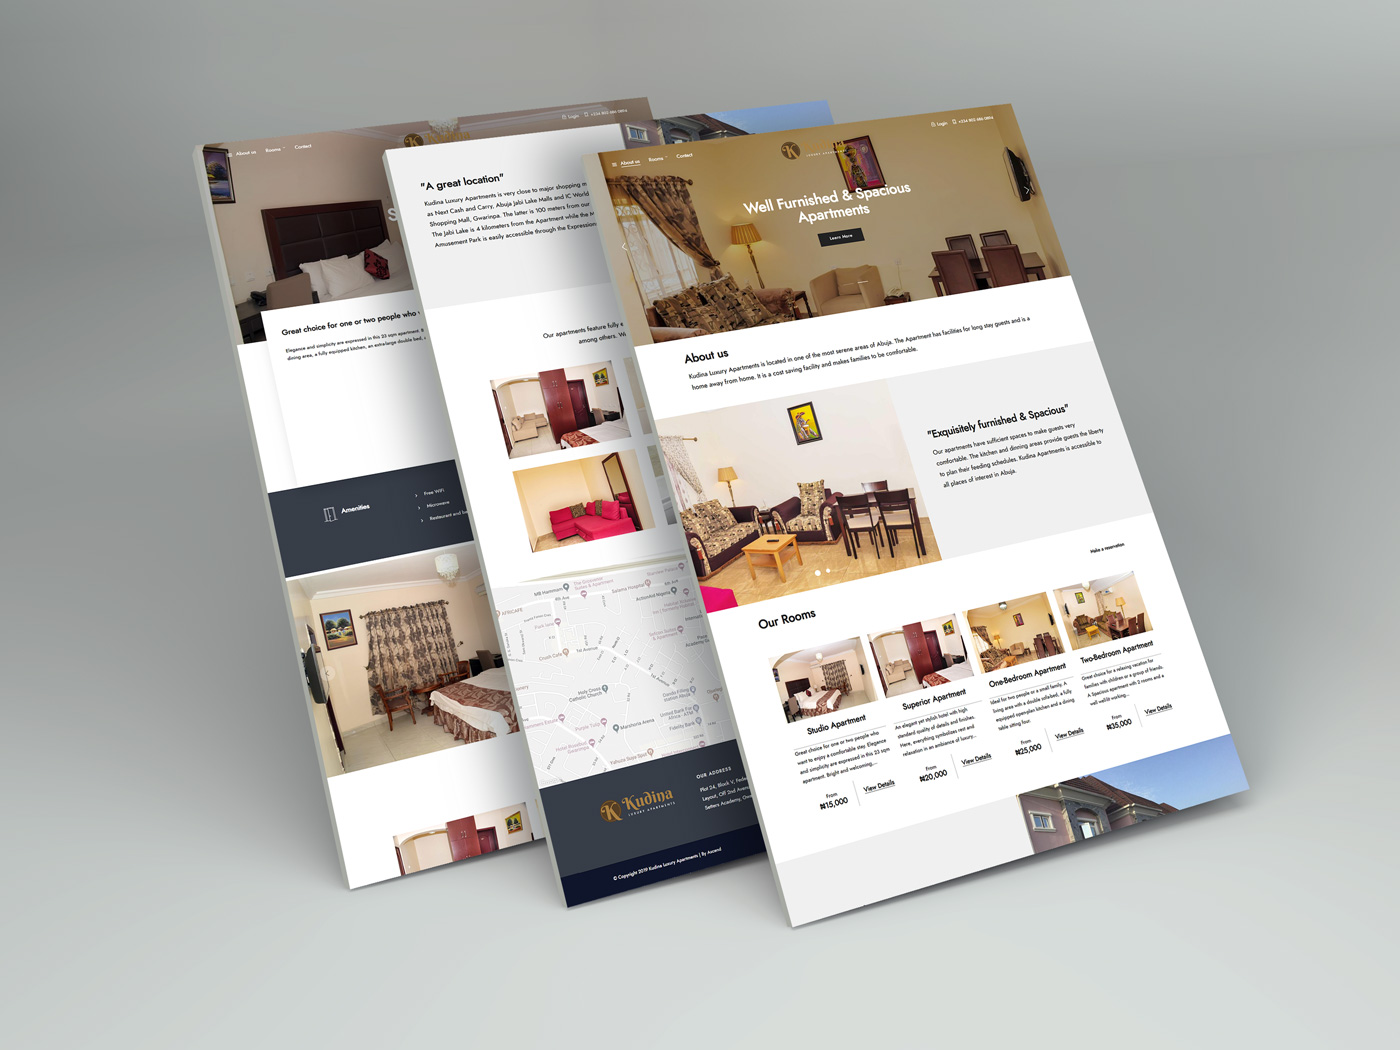 Hotel and Renting Apartments Website